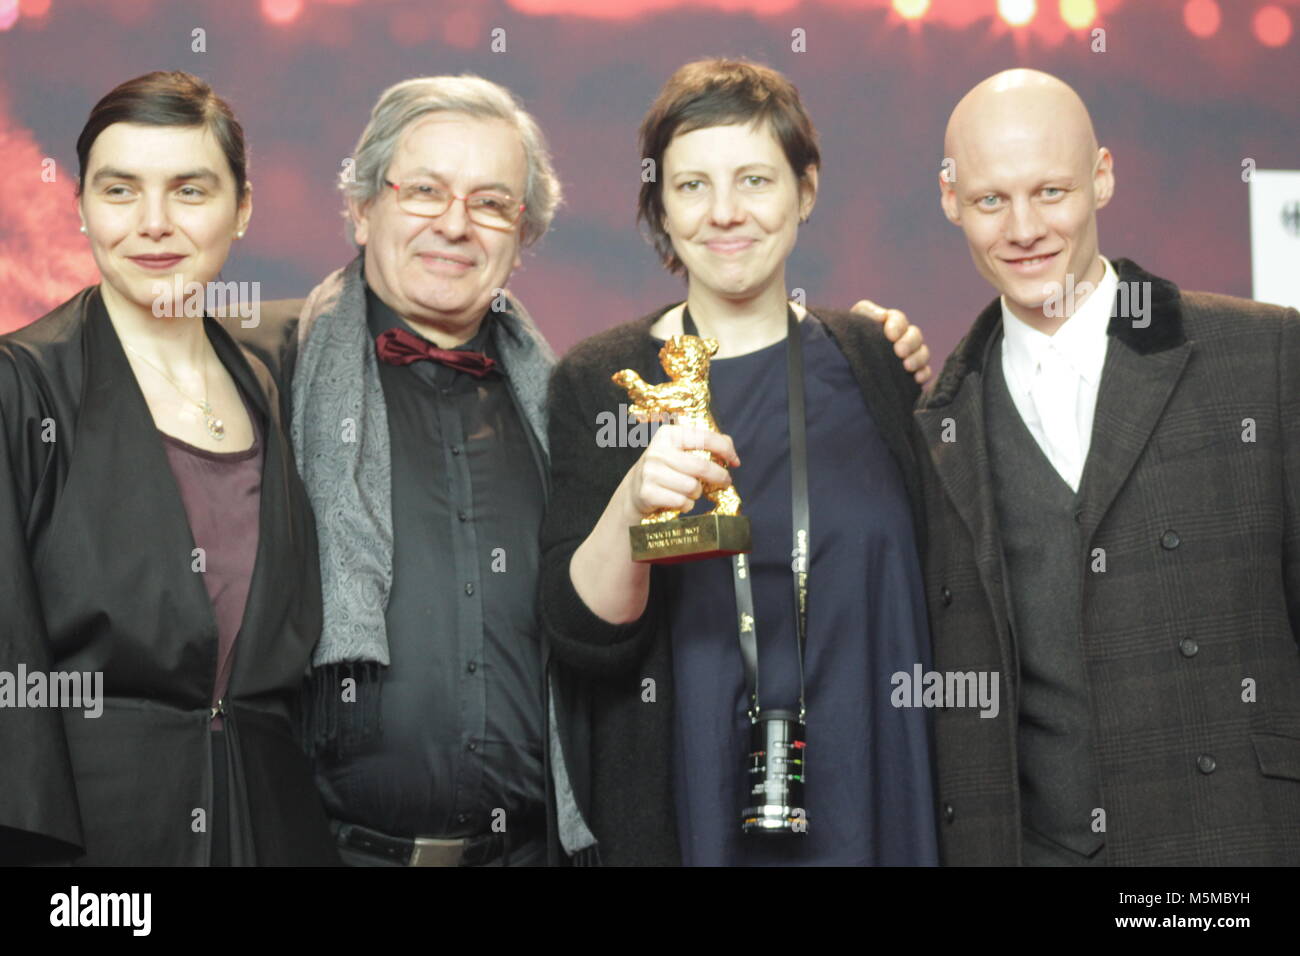 Berlin, Germany. 24th February, 2018. Winner 68th Berlinale,  golden bear, Goldener Bär Best Film: 'Touch Me Not' by Adina Pintilie , Berlin, Germany. 24th February, 2018. Press conference at the Grand Hyatt Hotel in Berlin/Germany for 68th Berlinale, Featuring:  Adina Pintilie, “Credits: T.O.Pictures / Alamy Live News“ Stock Photo